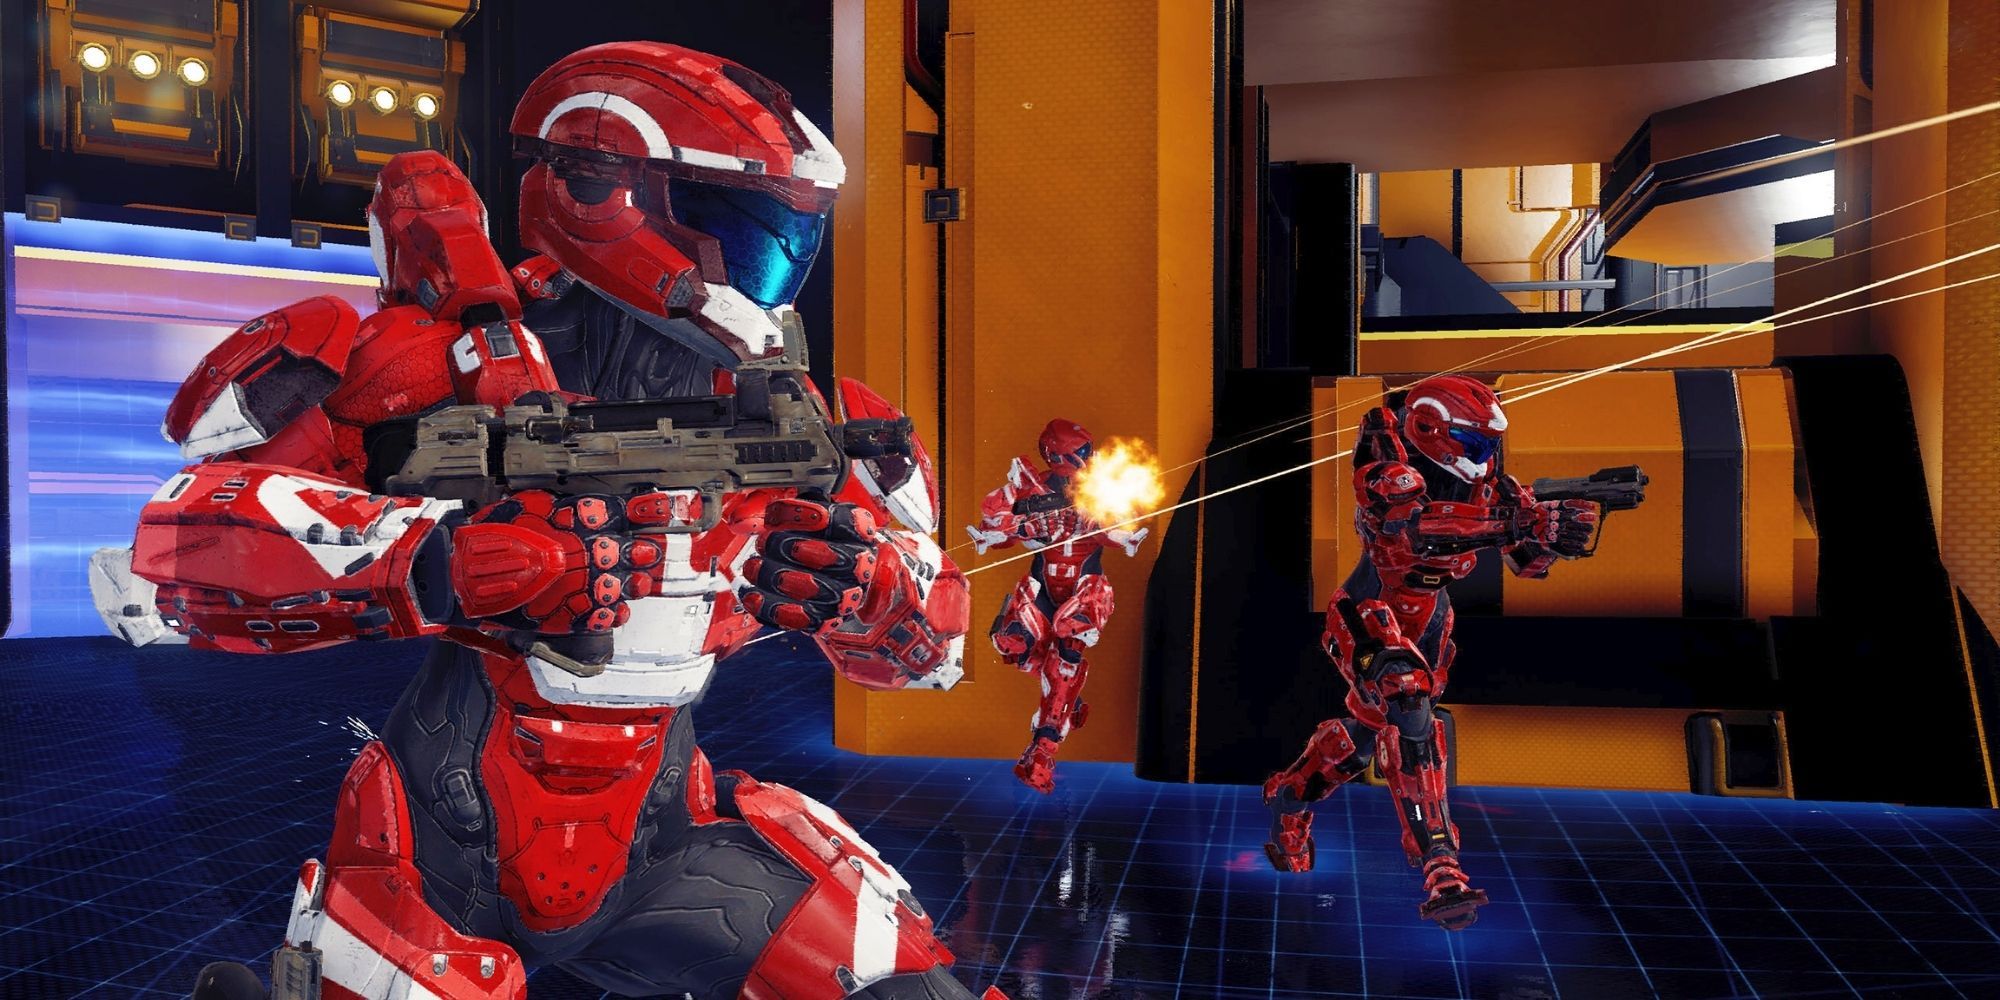 Halo Reach Multiplayer, Promo shot of 3 players wearing red playing multiplayer